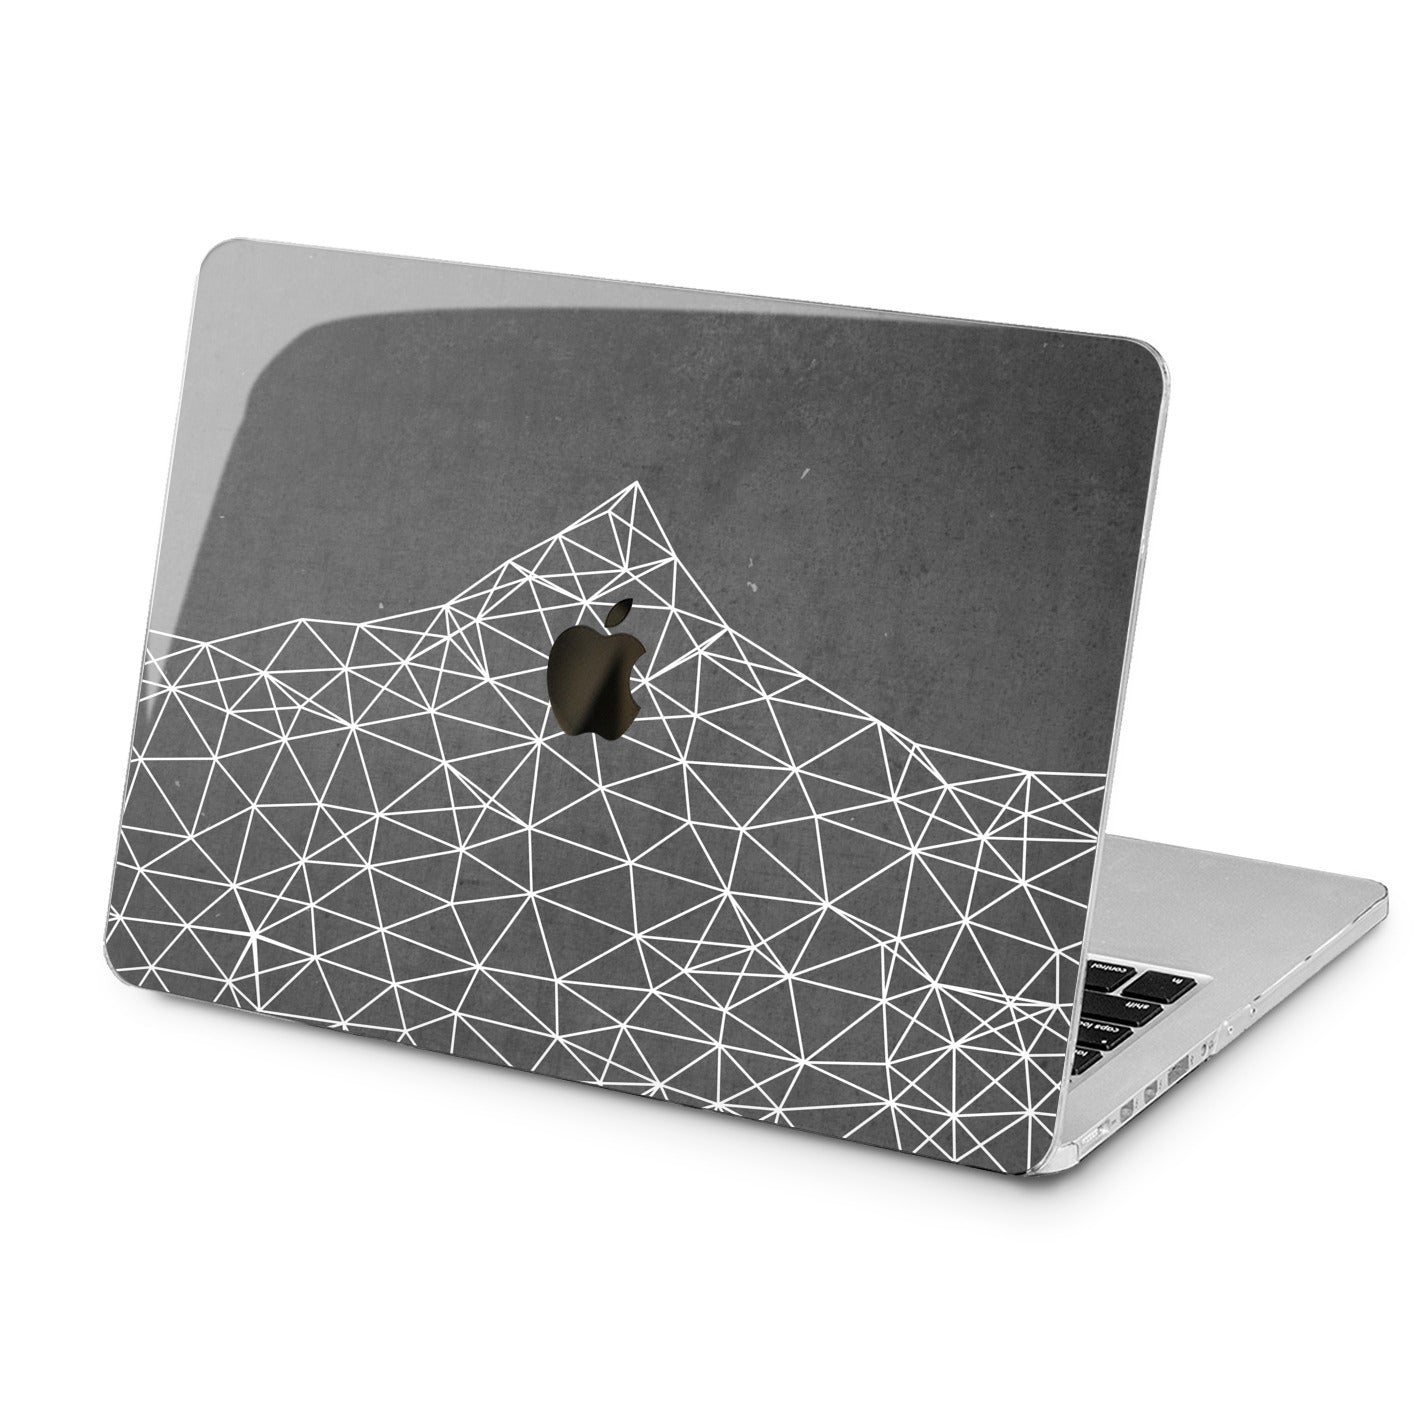 Lex Altern Lex Altern Abstract Mountain Case for your Laptop Apple Macbook.